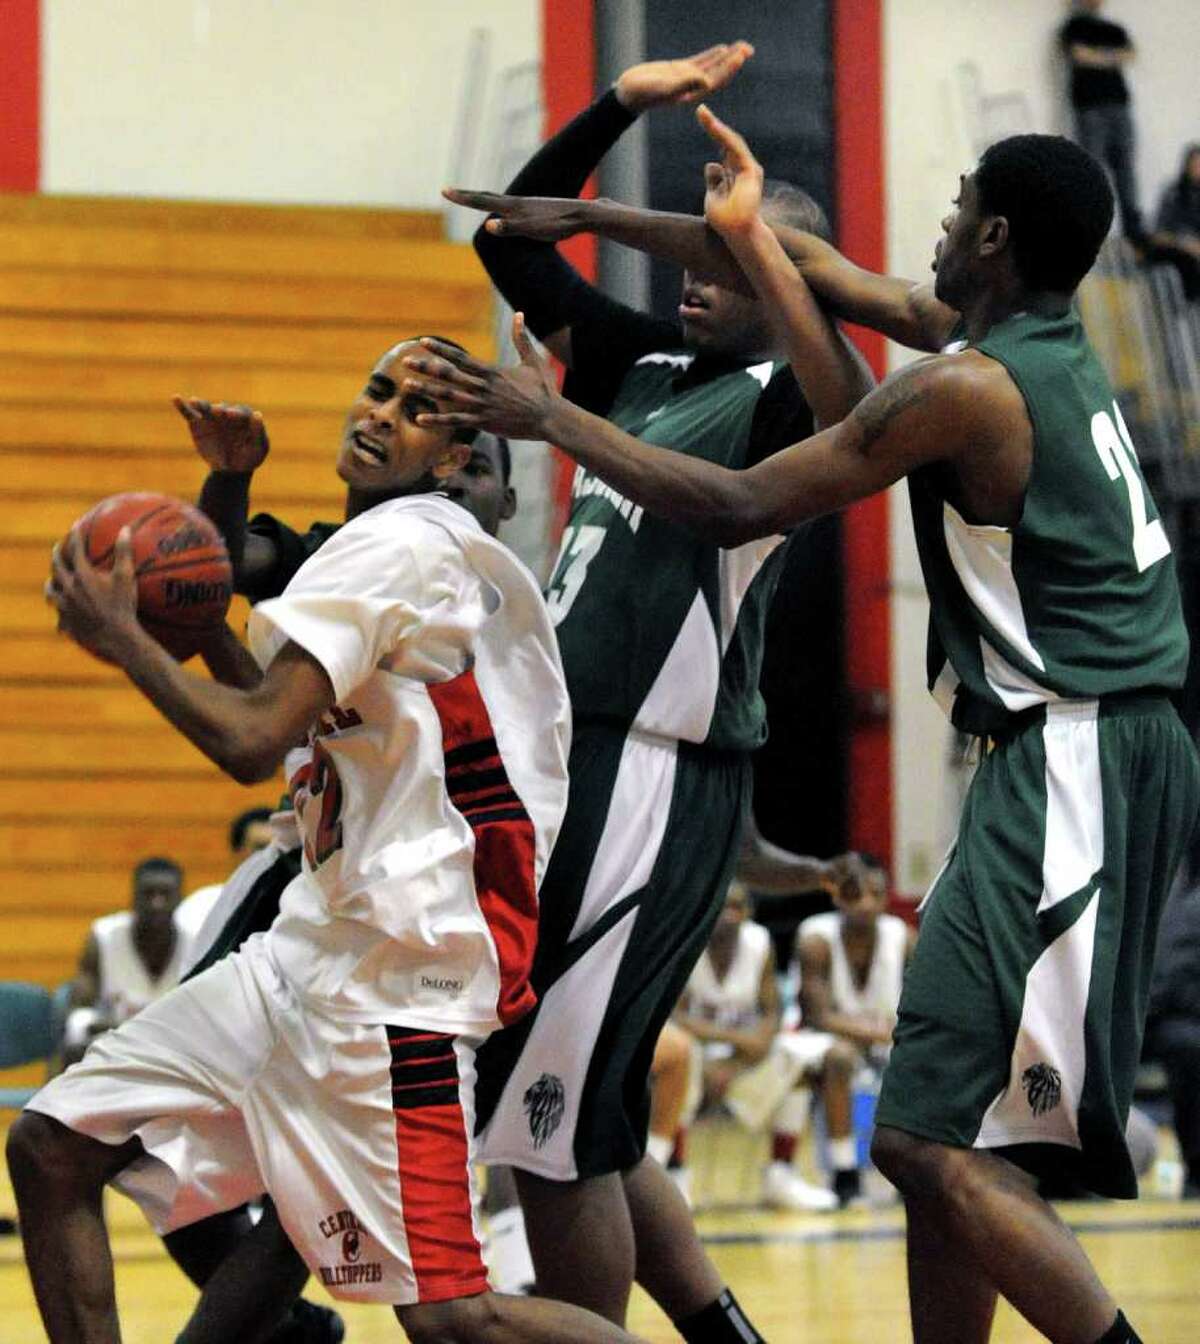 Central's #22 Yaaser Abdulgalil, left, gets pressured by three Bassick players after snatching a Bassick rebound, during boys basketball action in Bridgeport on Friday January 28, 2011.